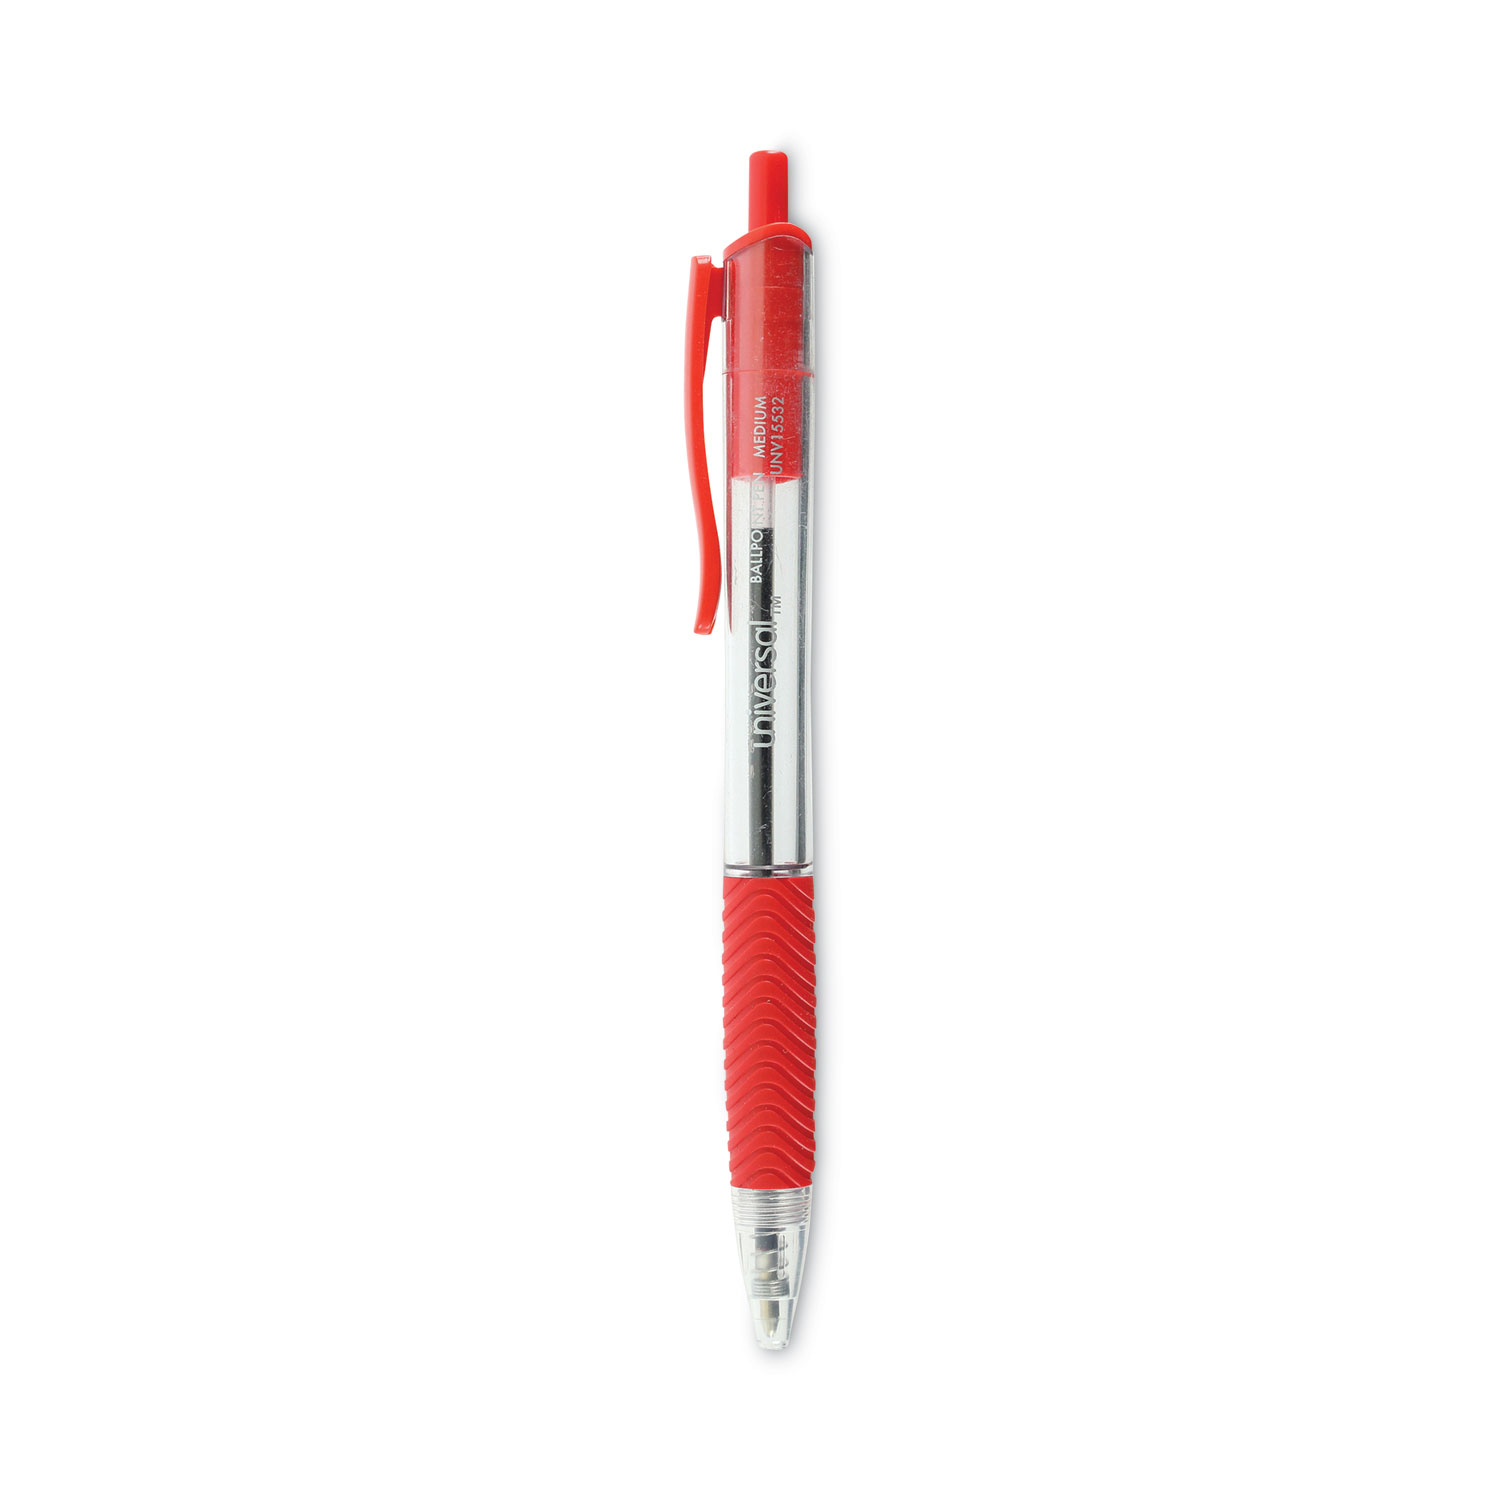 R.S.V.P. Ballpoint Pen, Stick, Medium 1 mm, Red Ink, Clear/Red